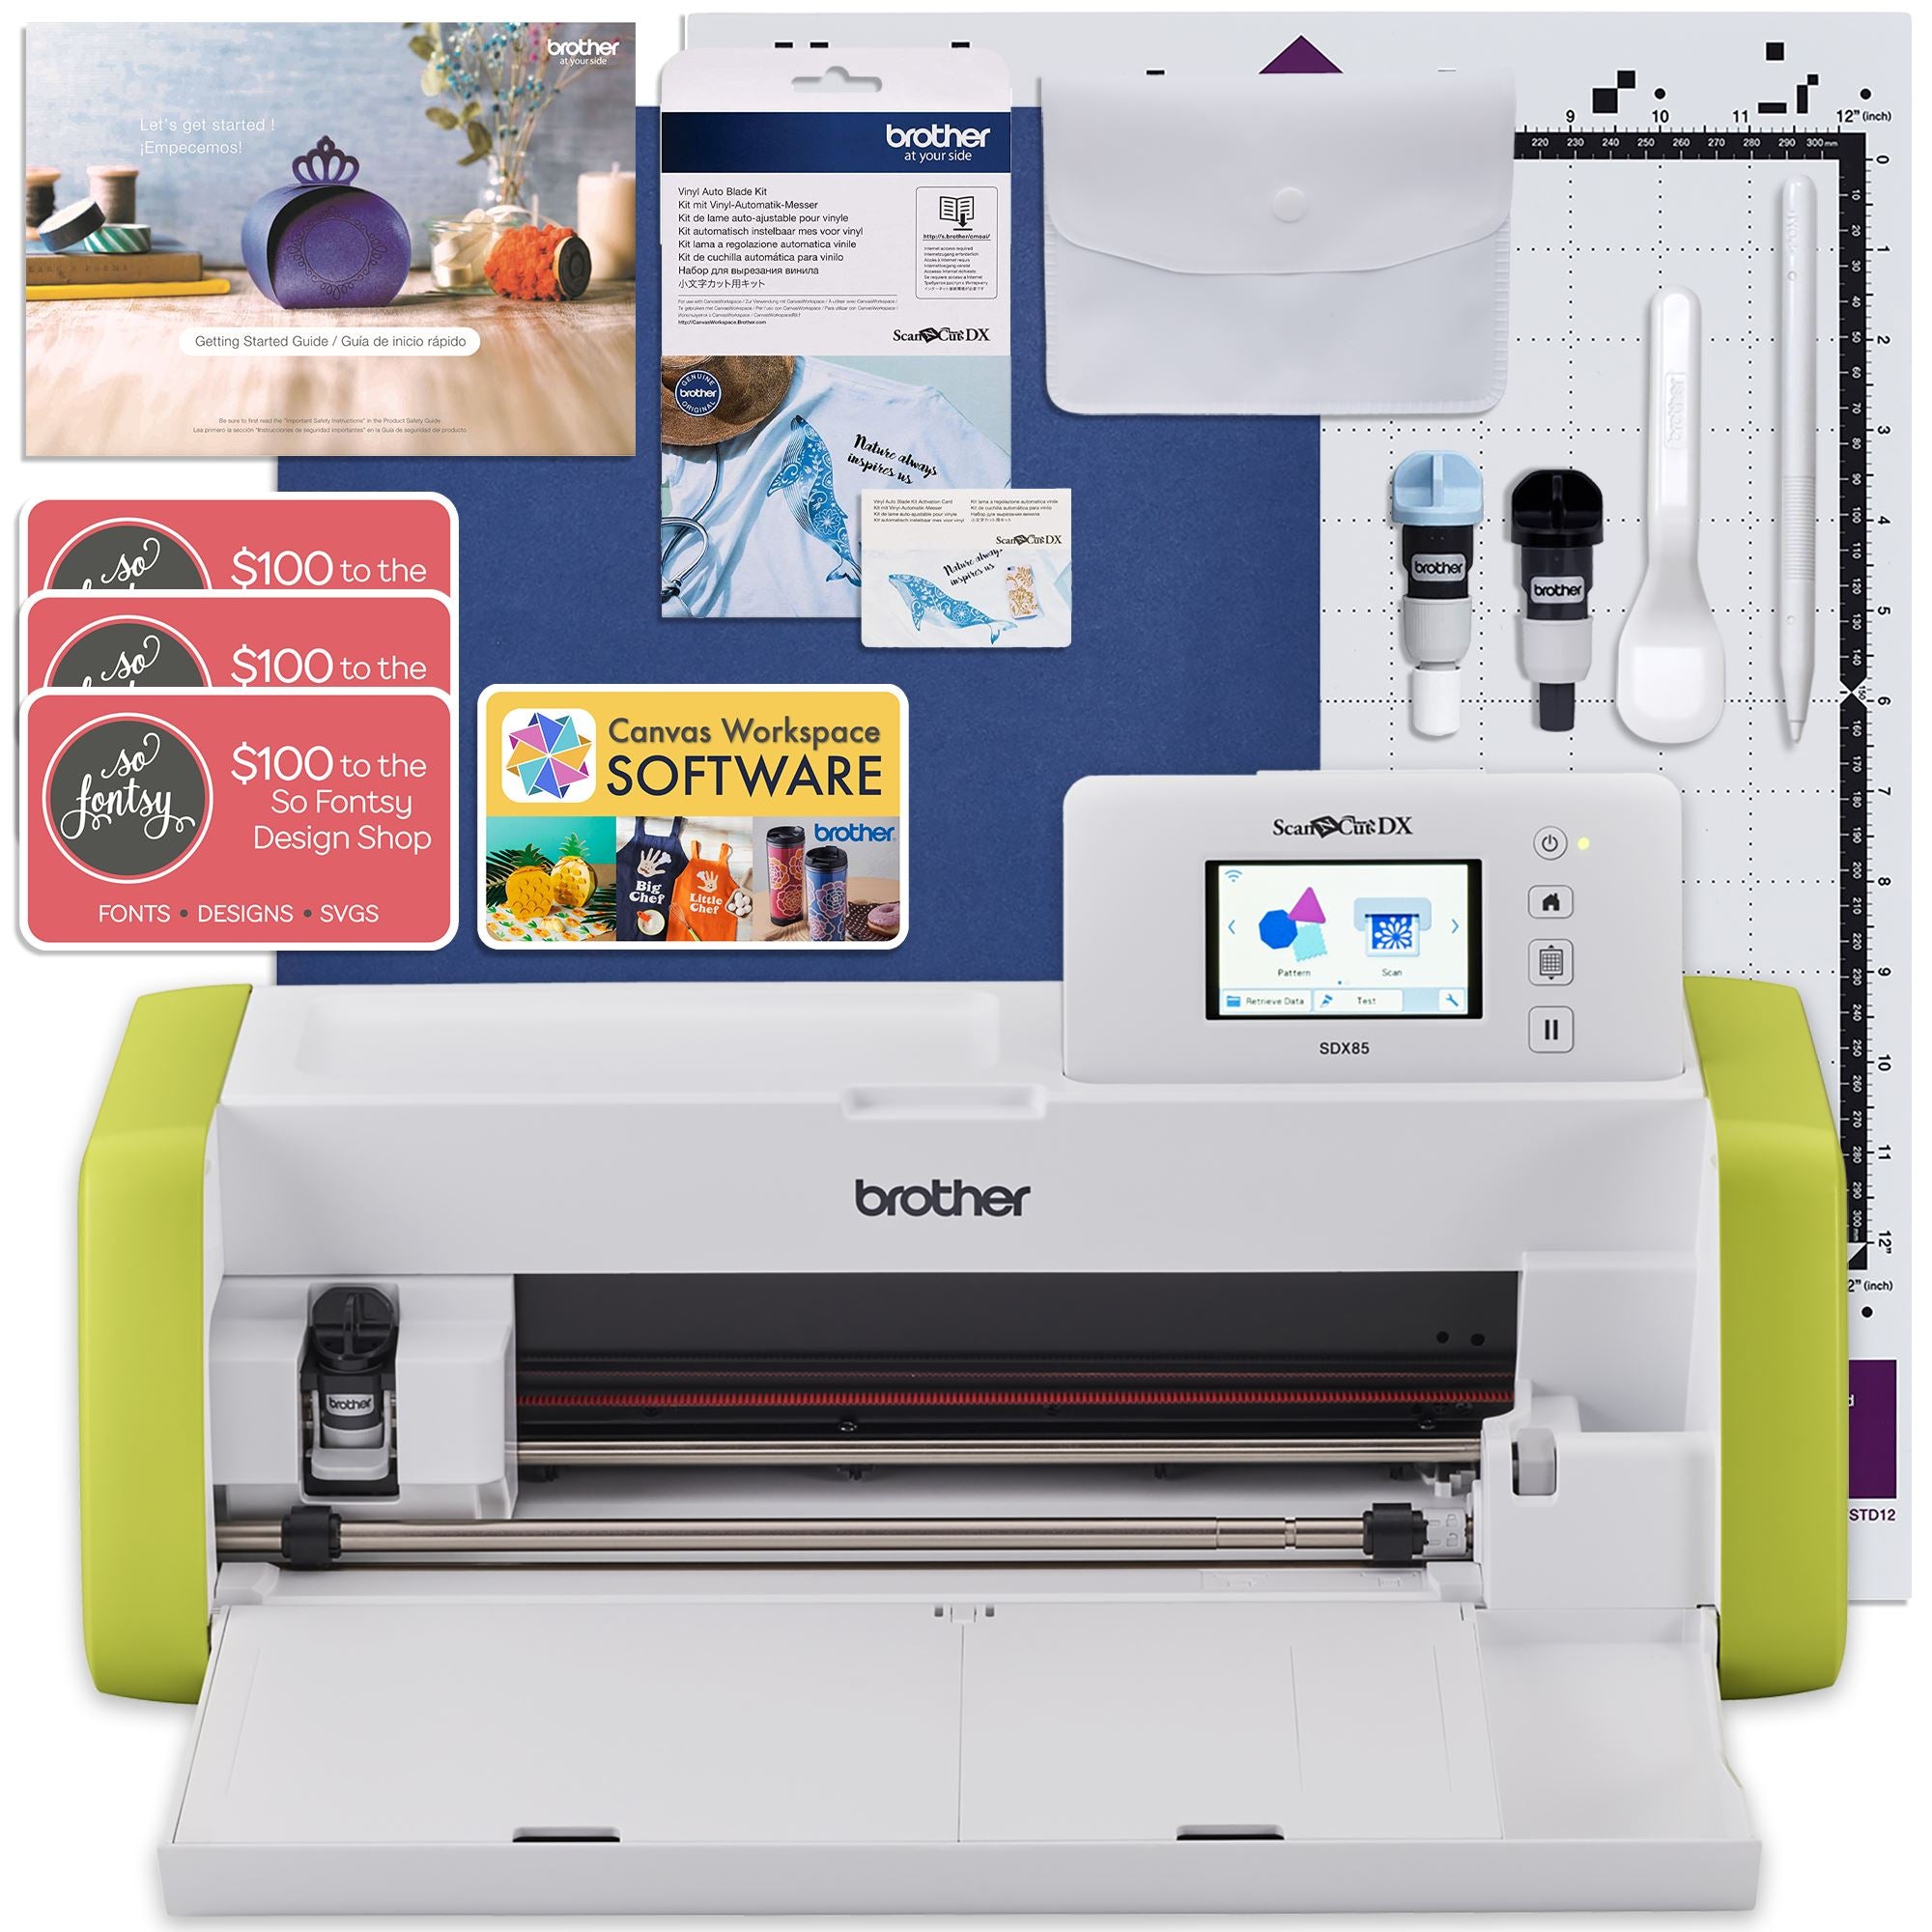 Make Stickers with the ScanNCut DX - Conquer Your Cricut, Cameo